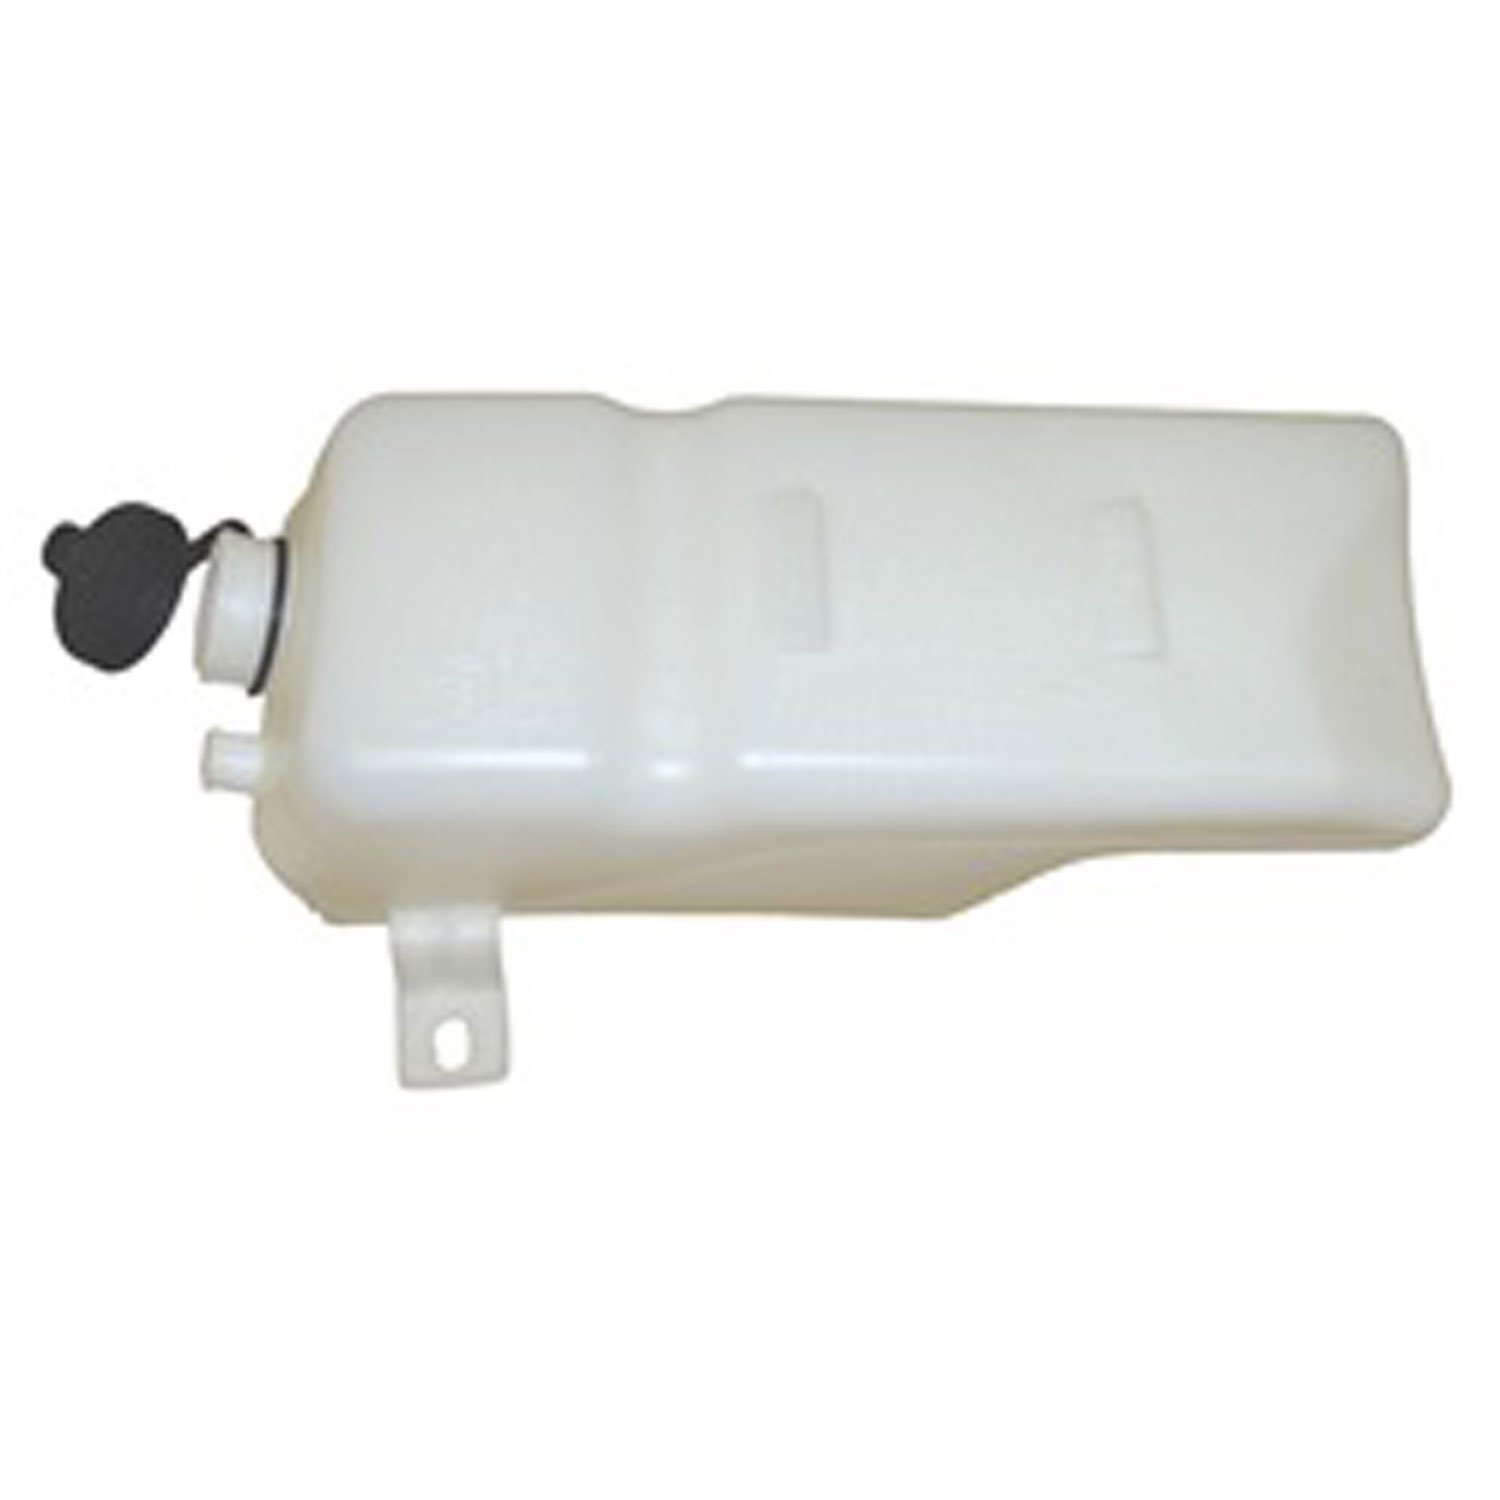 This radiator overflow bottle and cap from Omix-ADA fits 81-86 Jeep CJ-7s and CJ-8s and 87-95 Wranglers.